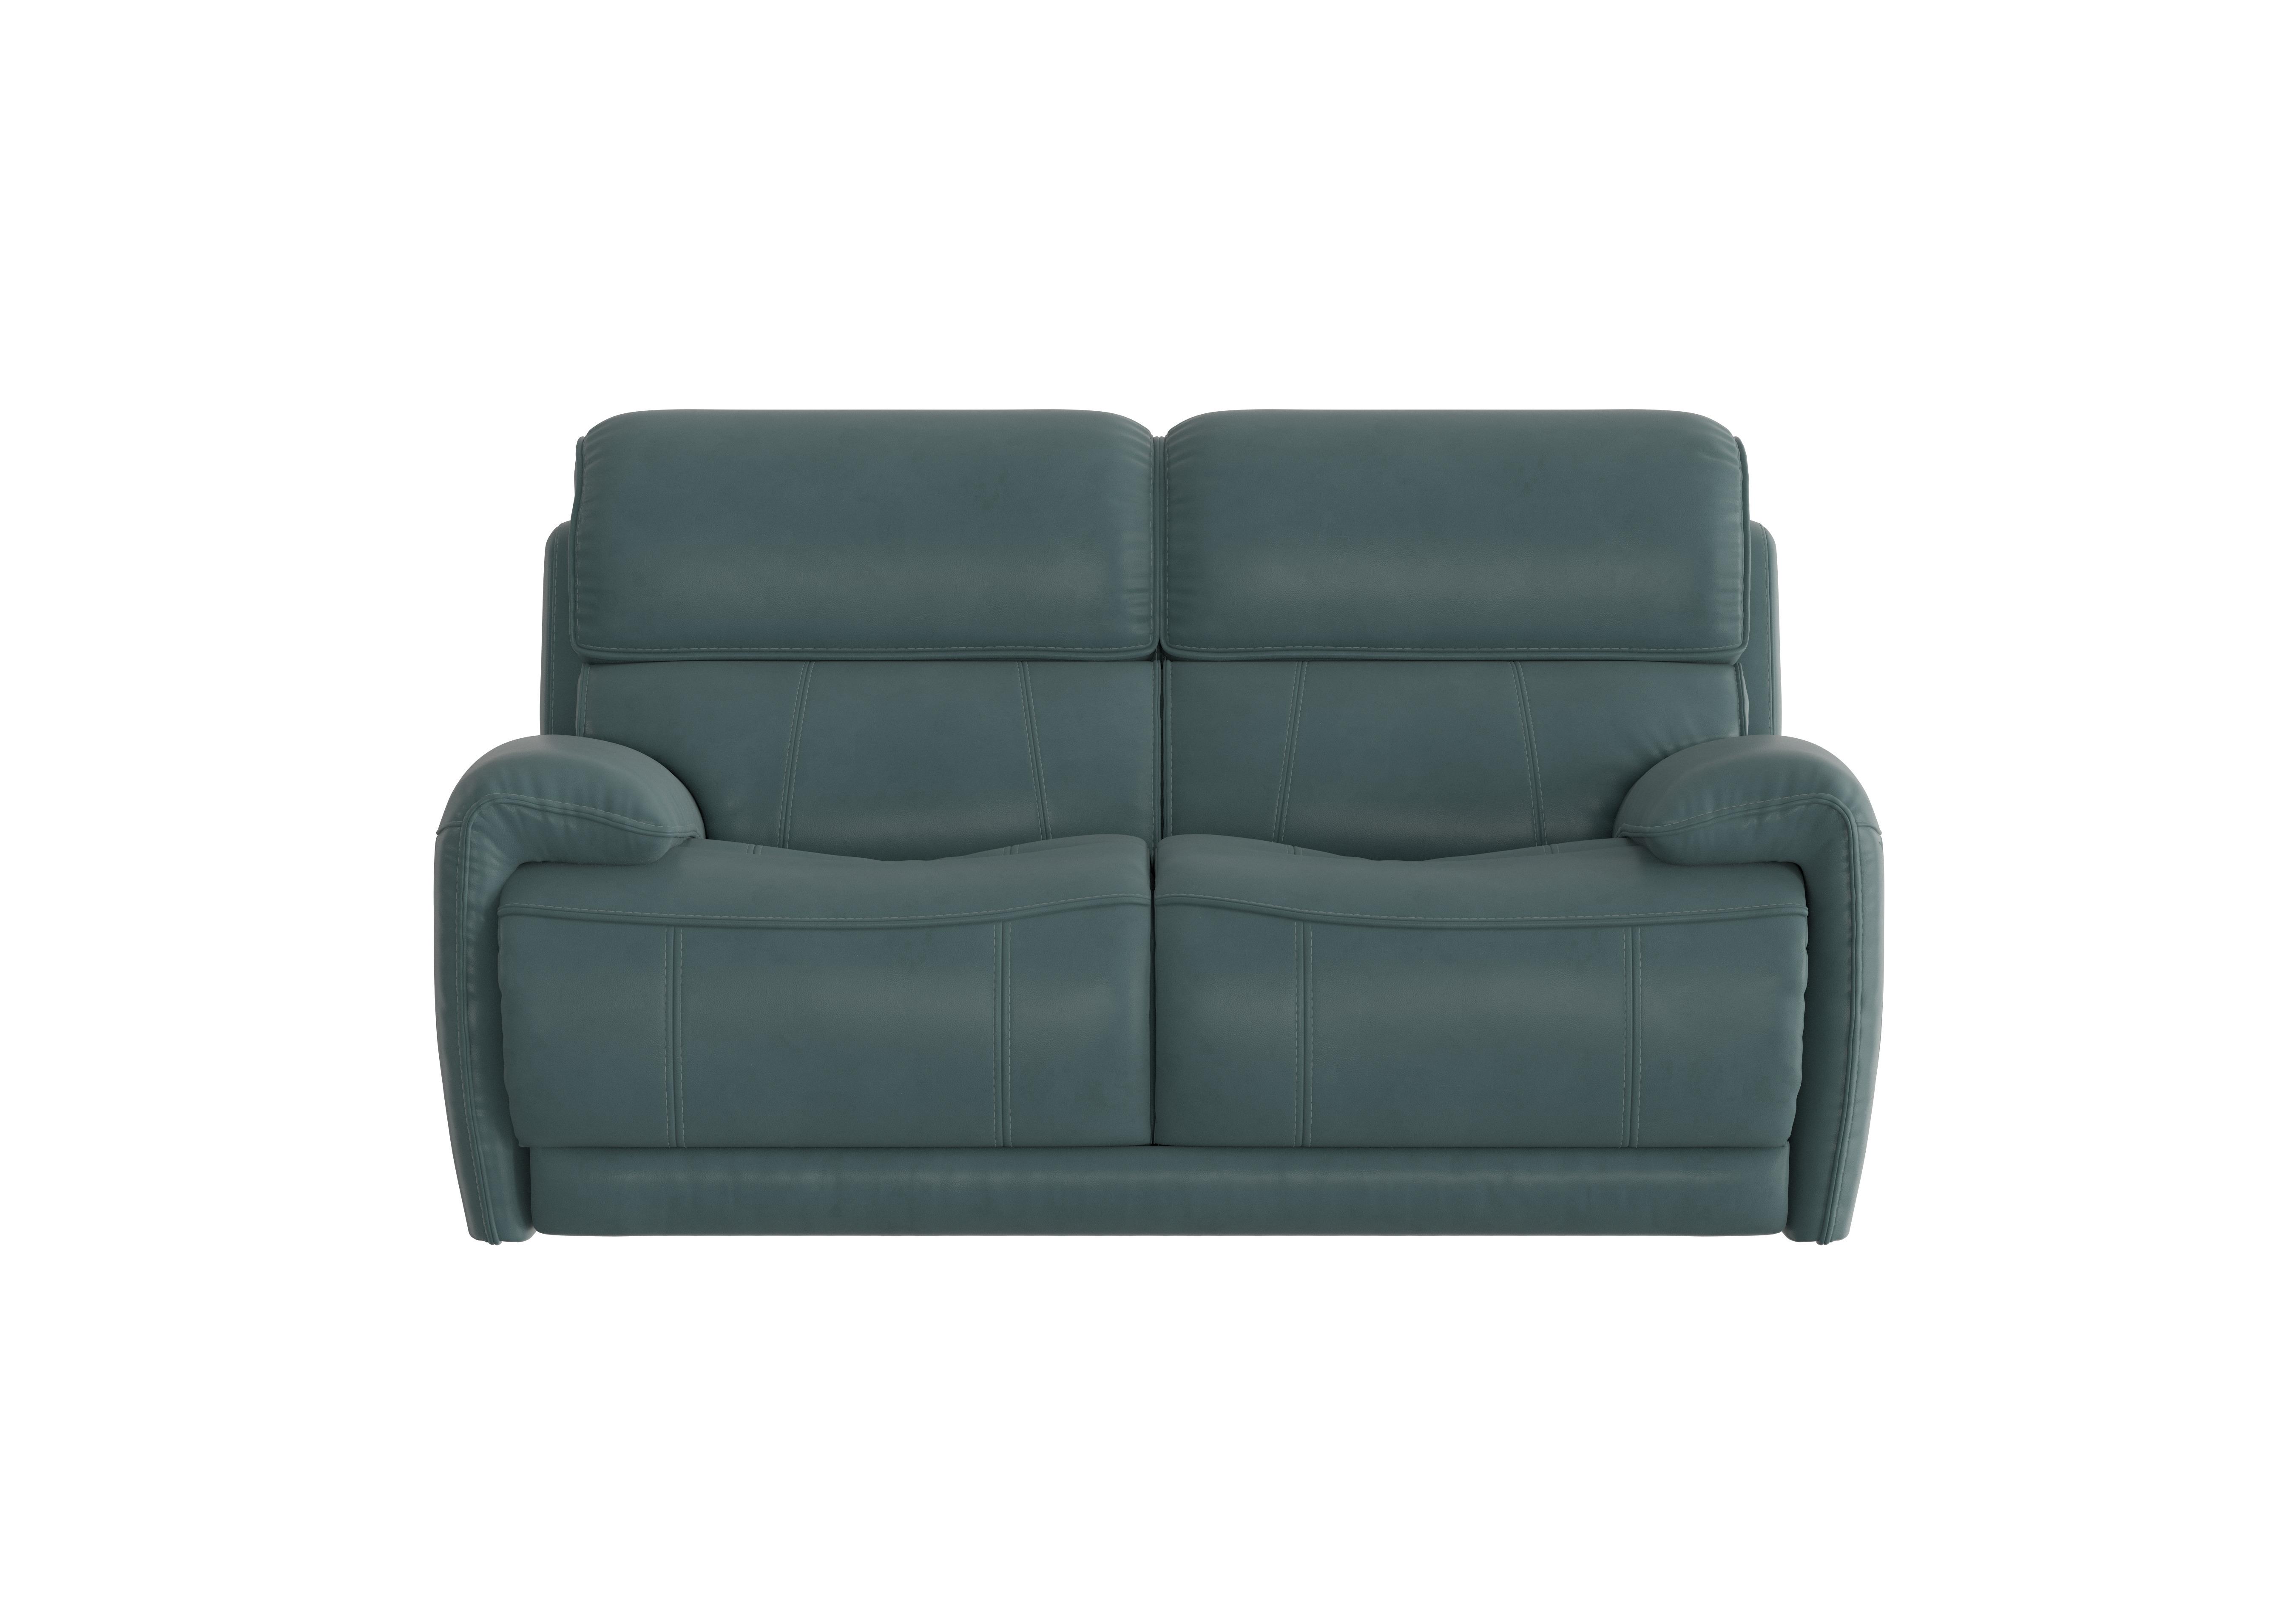 Link 2 Seater Leather Sofa in Bv-301e Lake Green on Furniture Village